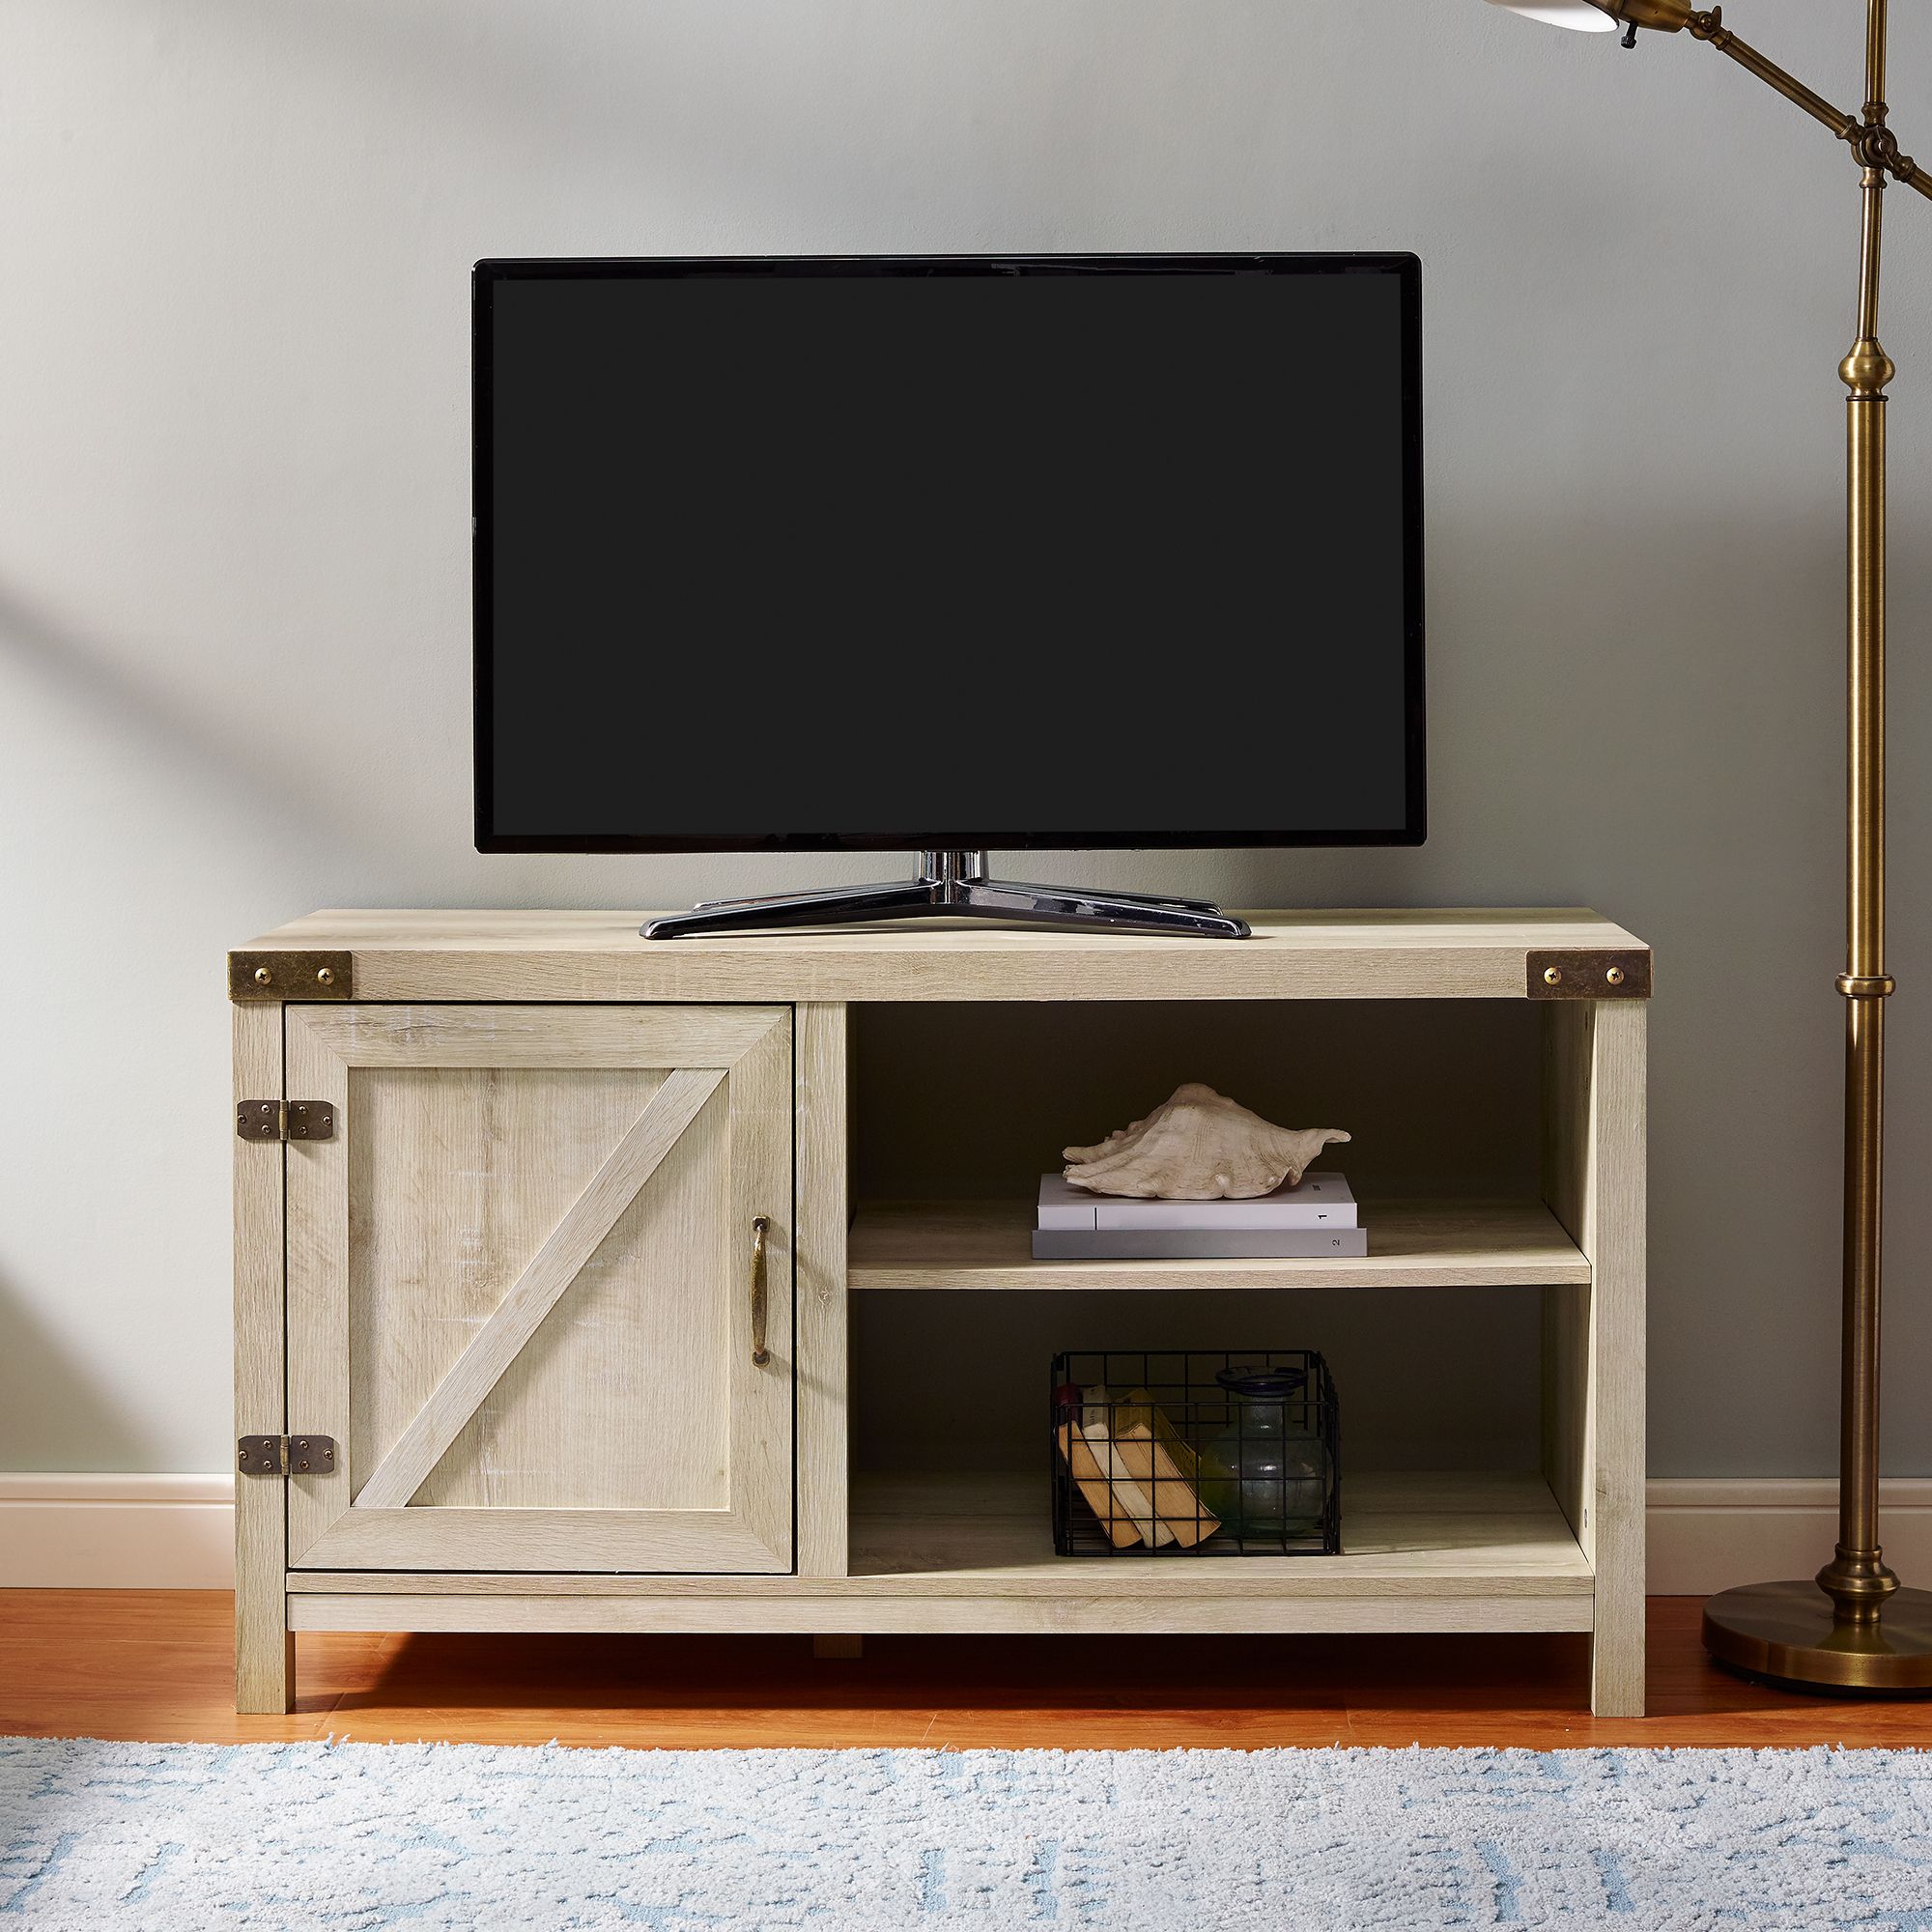 Woven Paths Farmhouse Barn Door Tv Stand For Tvs Up To 50 Inside Mclelland Tv Stands For Tvs Up To 50&quot; (View 1 of 15)